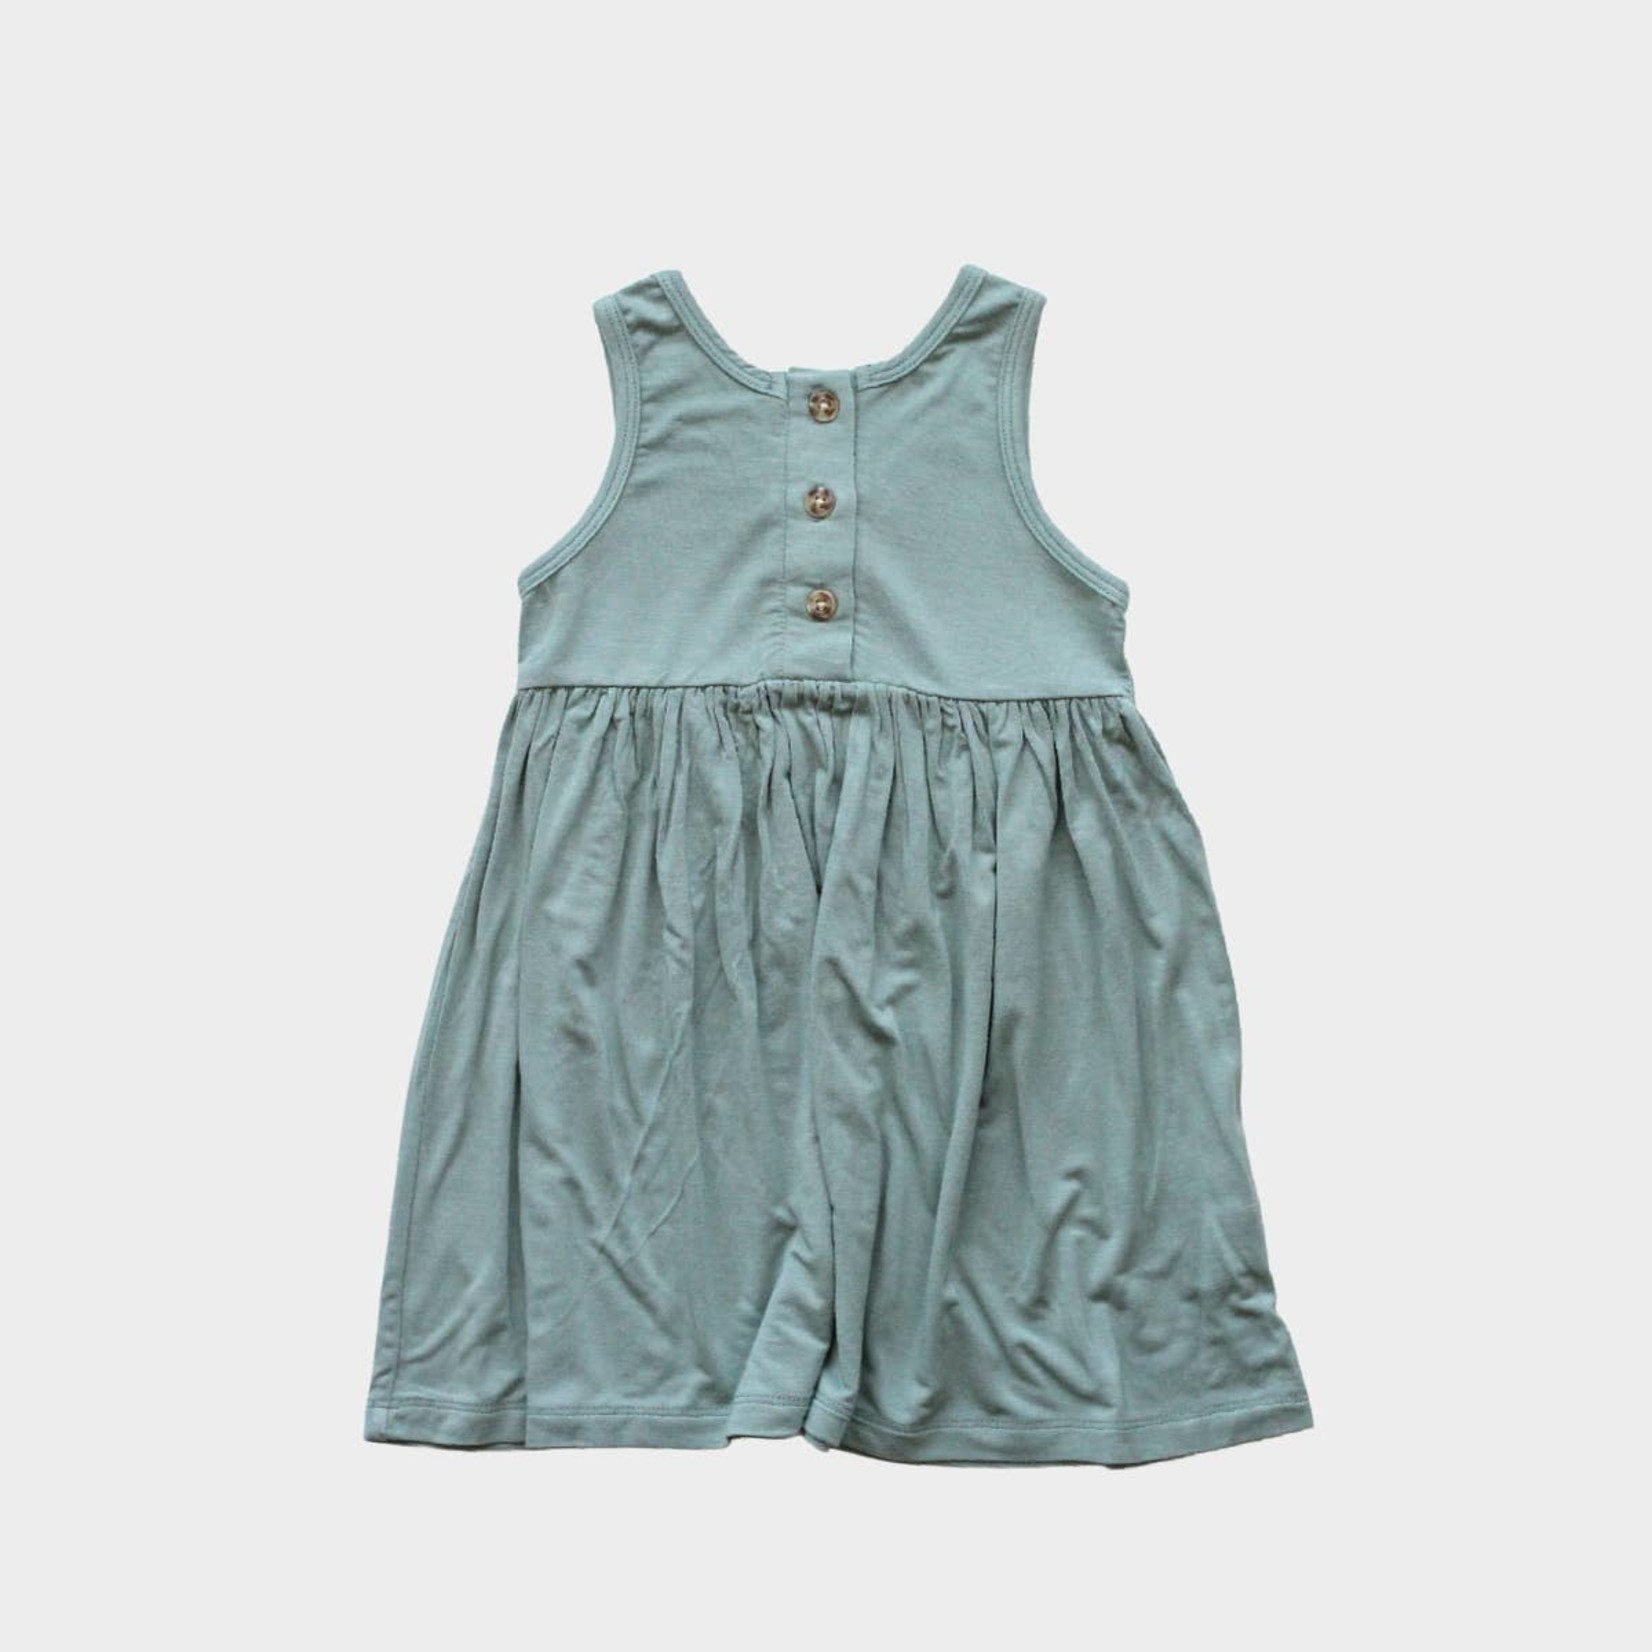 babysprouts clothing company Henley Tank Dress in Teal Green